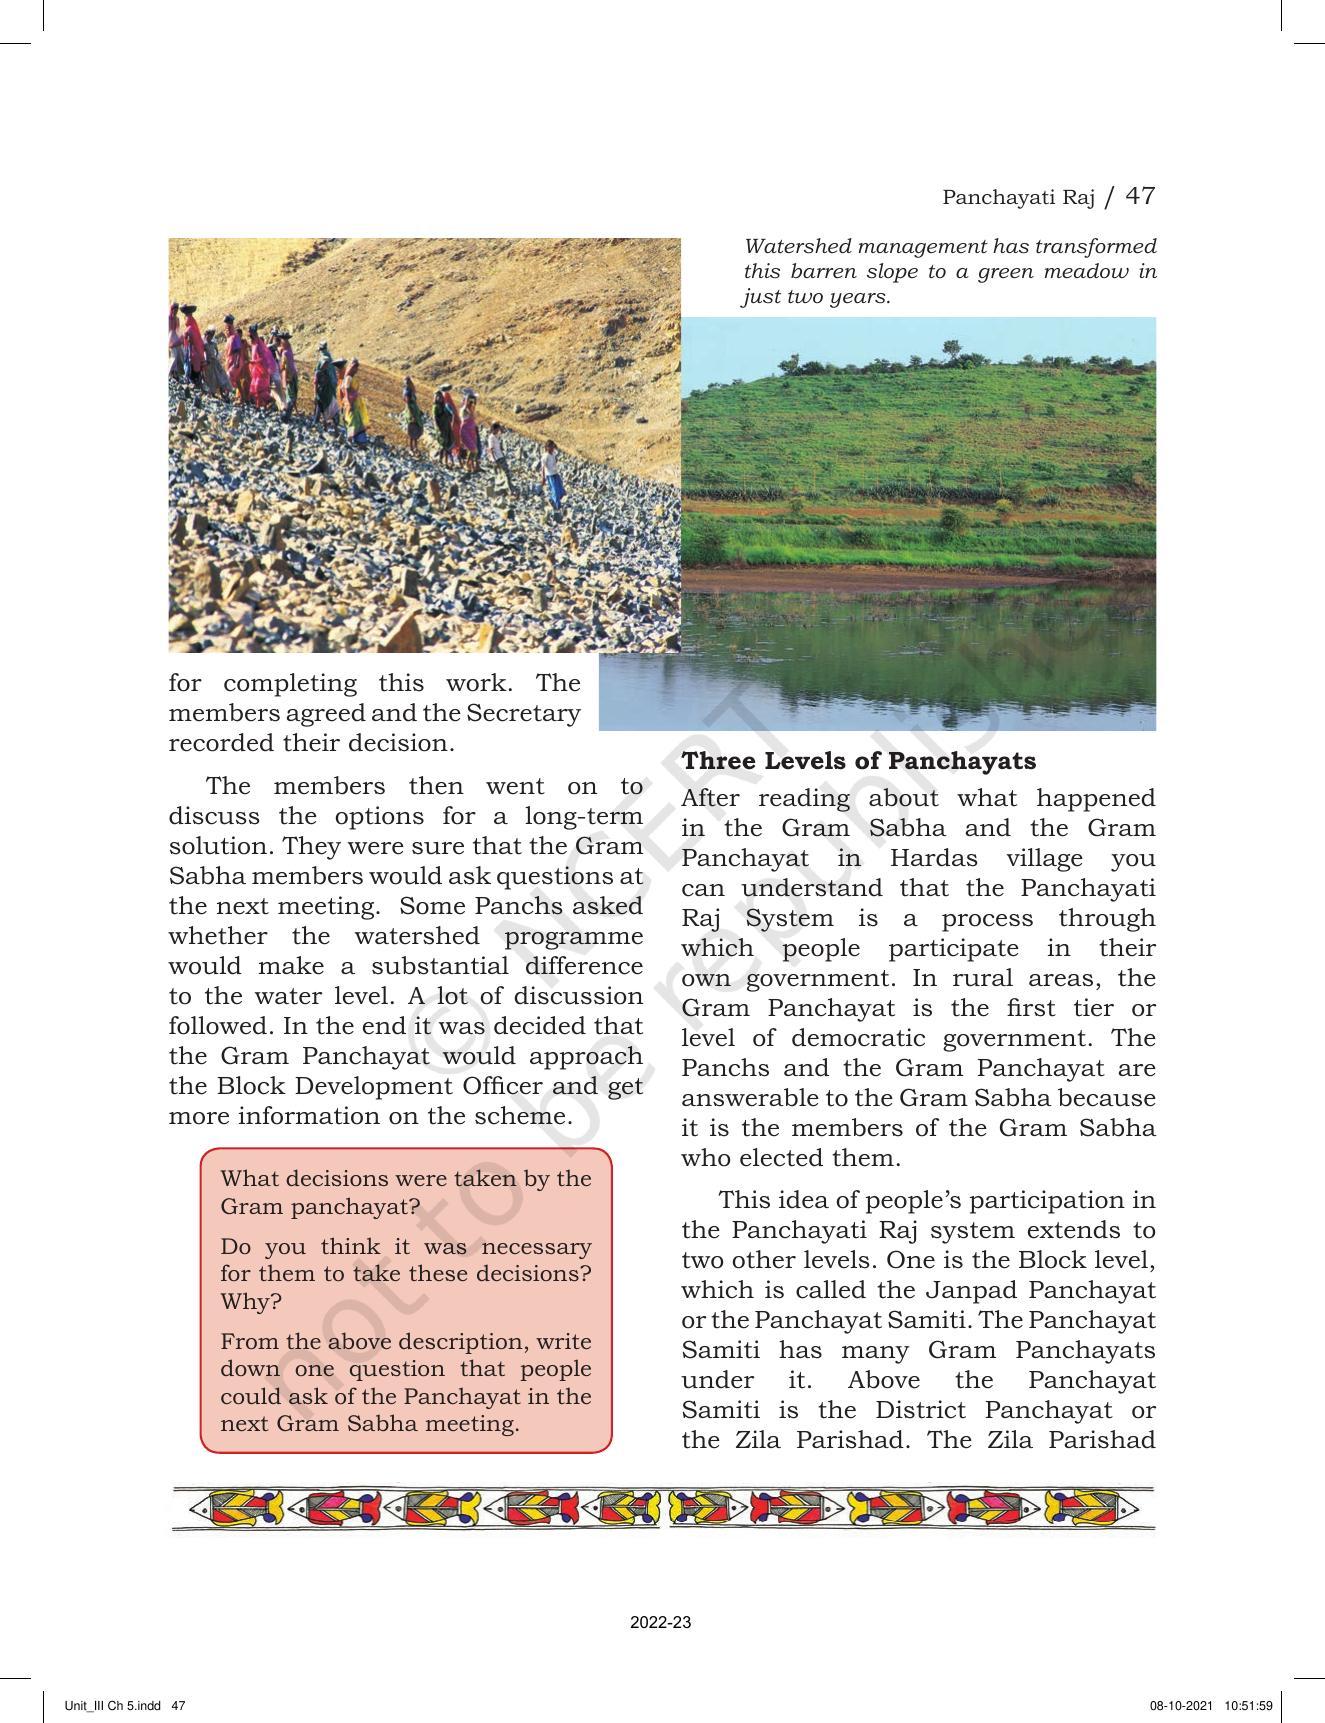 NCERT Book for Class 6 Social Science(Political Science) : Chapter 5-Panchayati Raj - Page 7